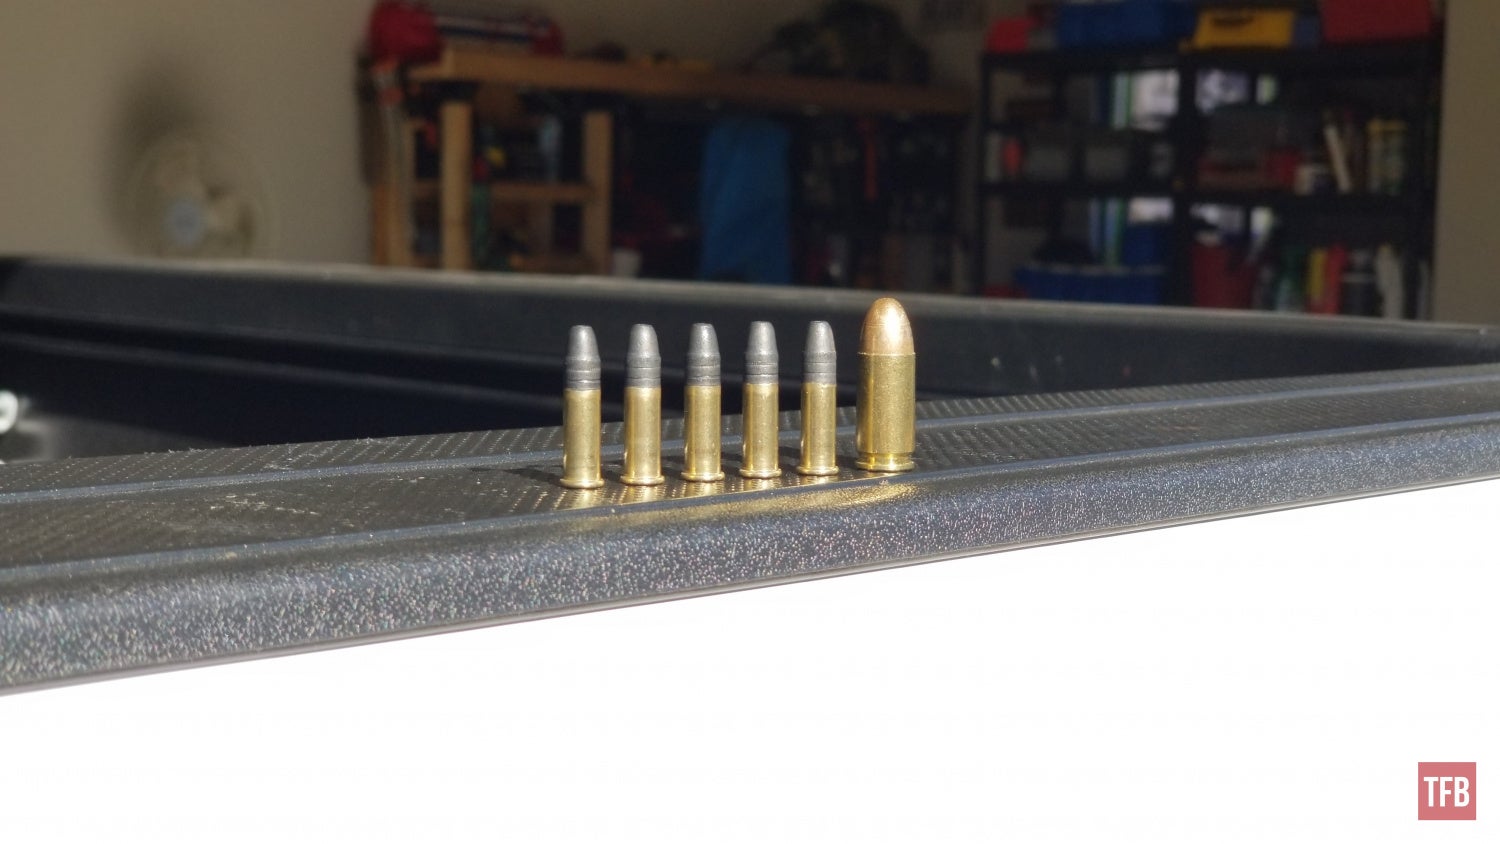 The Rimfire Report: The Value of 22LR During Ammo Shortages